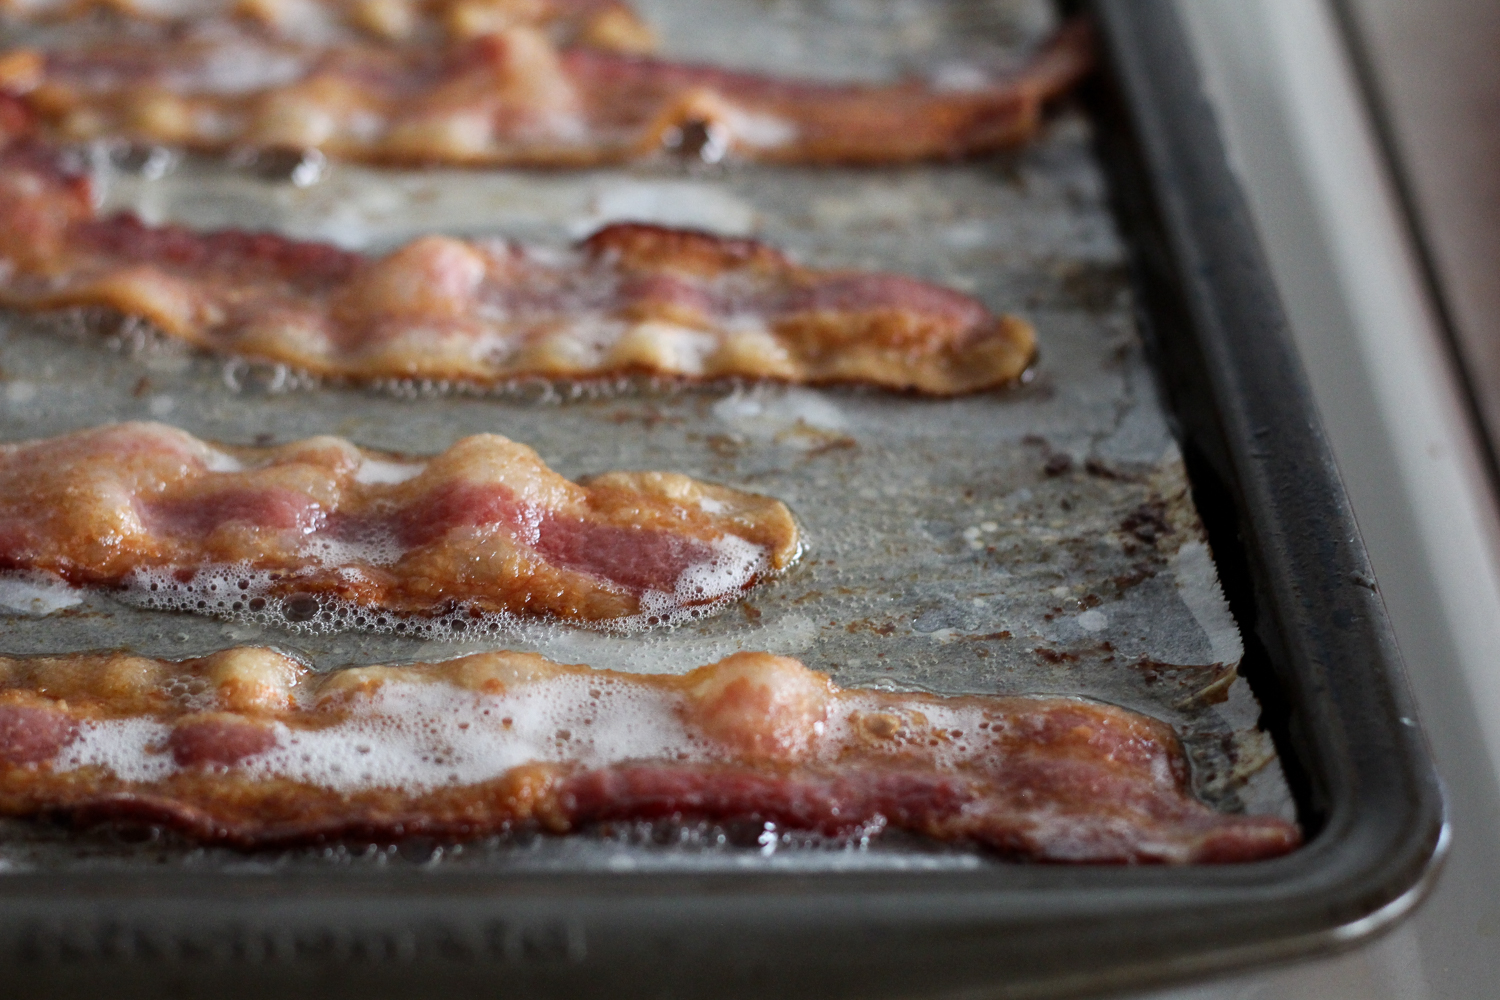 How To Cook Bacon In The Oven Without Preheating Worthy Pause,What Do Horses Eat For Treats